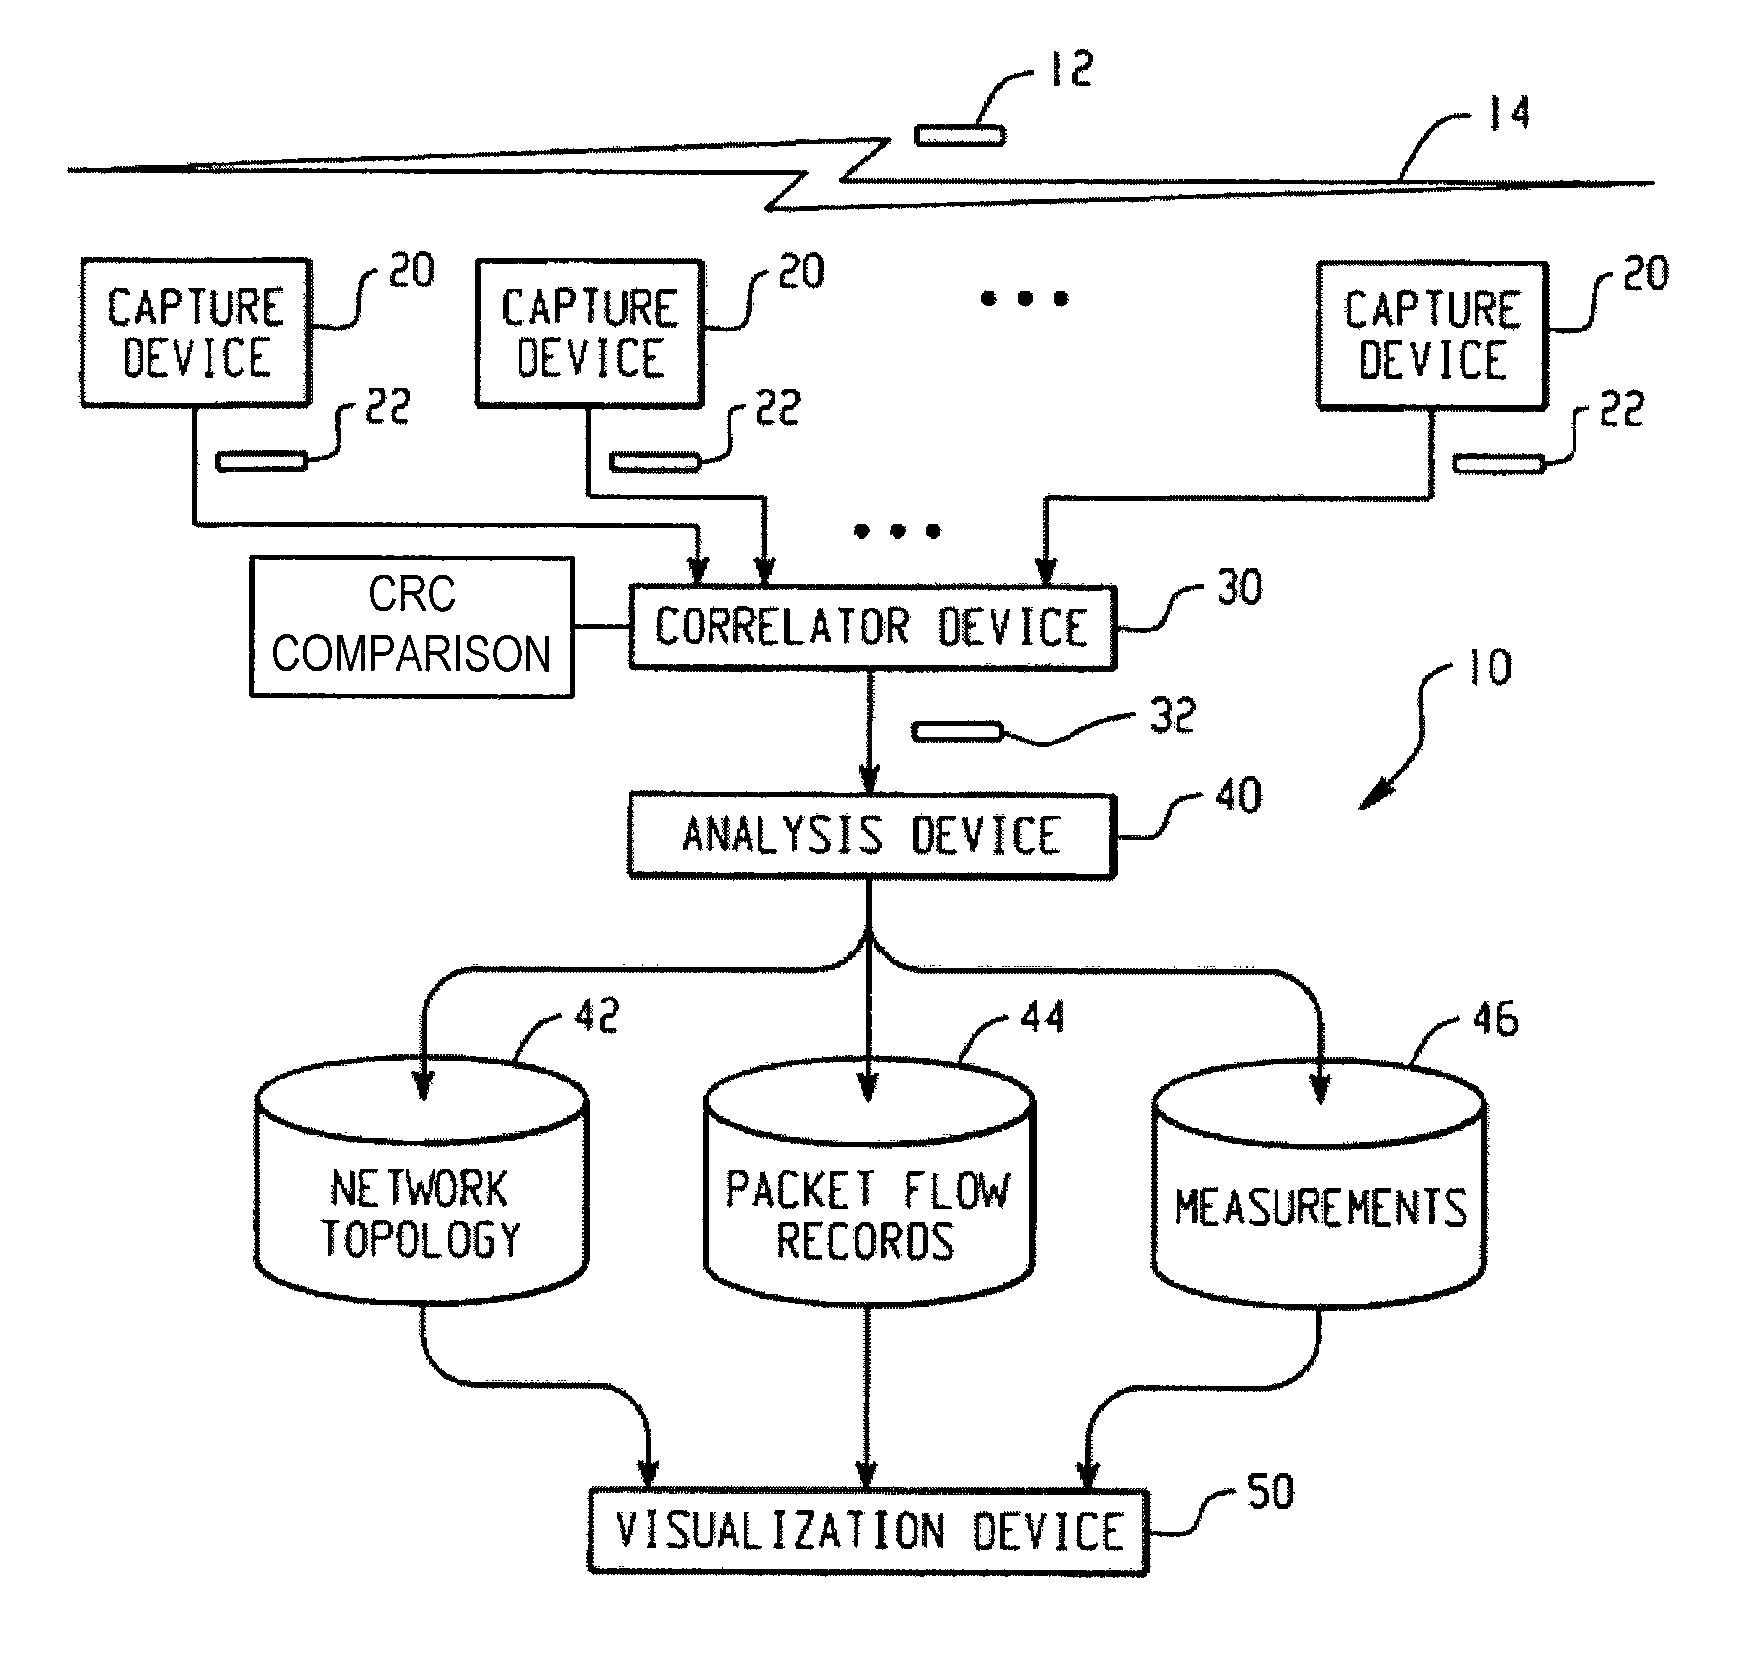 Network analysis system and method